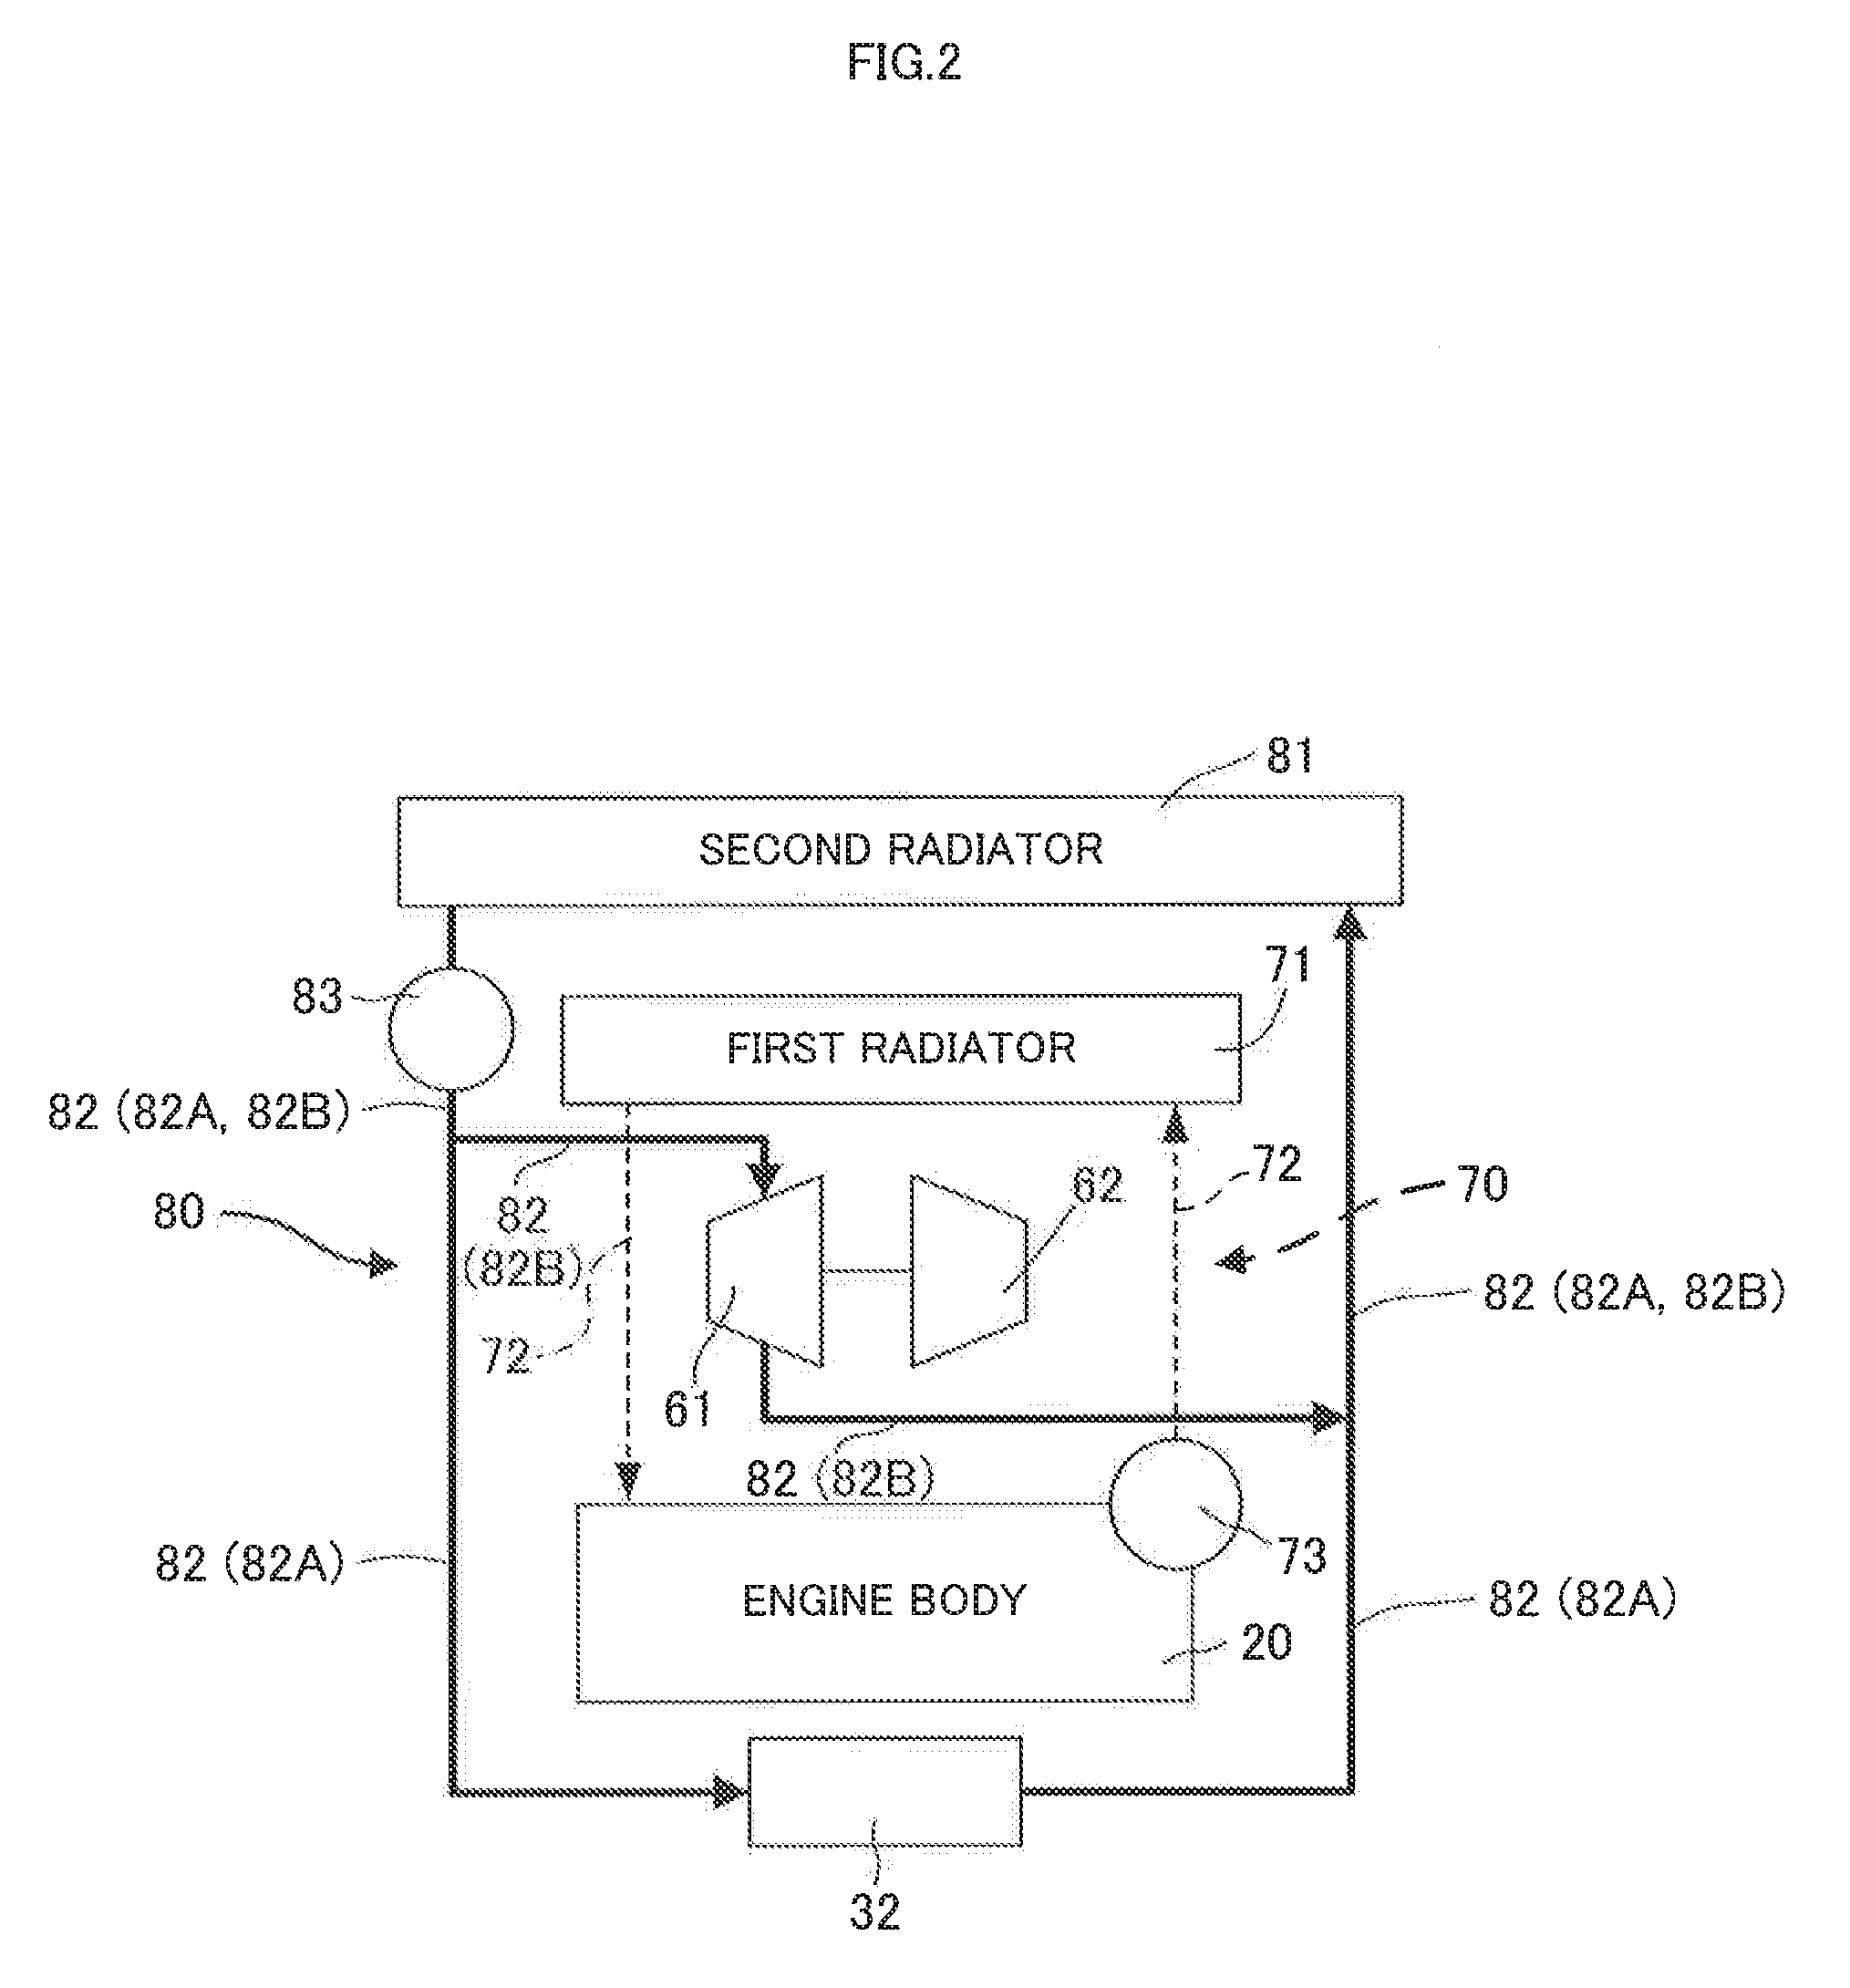 Cooling device for internal combustion engine provided with blowby gas recirculation device and turbocharger (as amended)